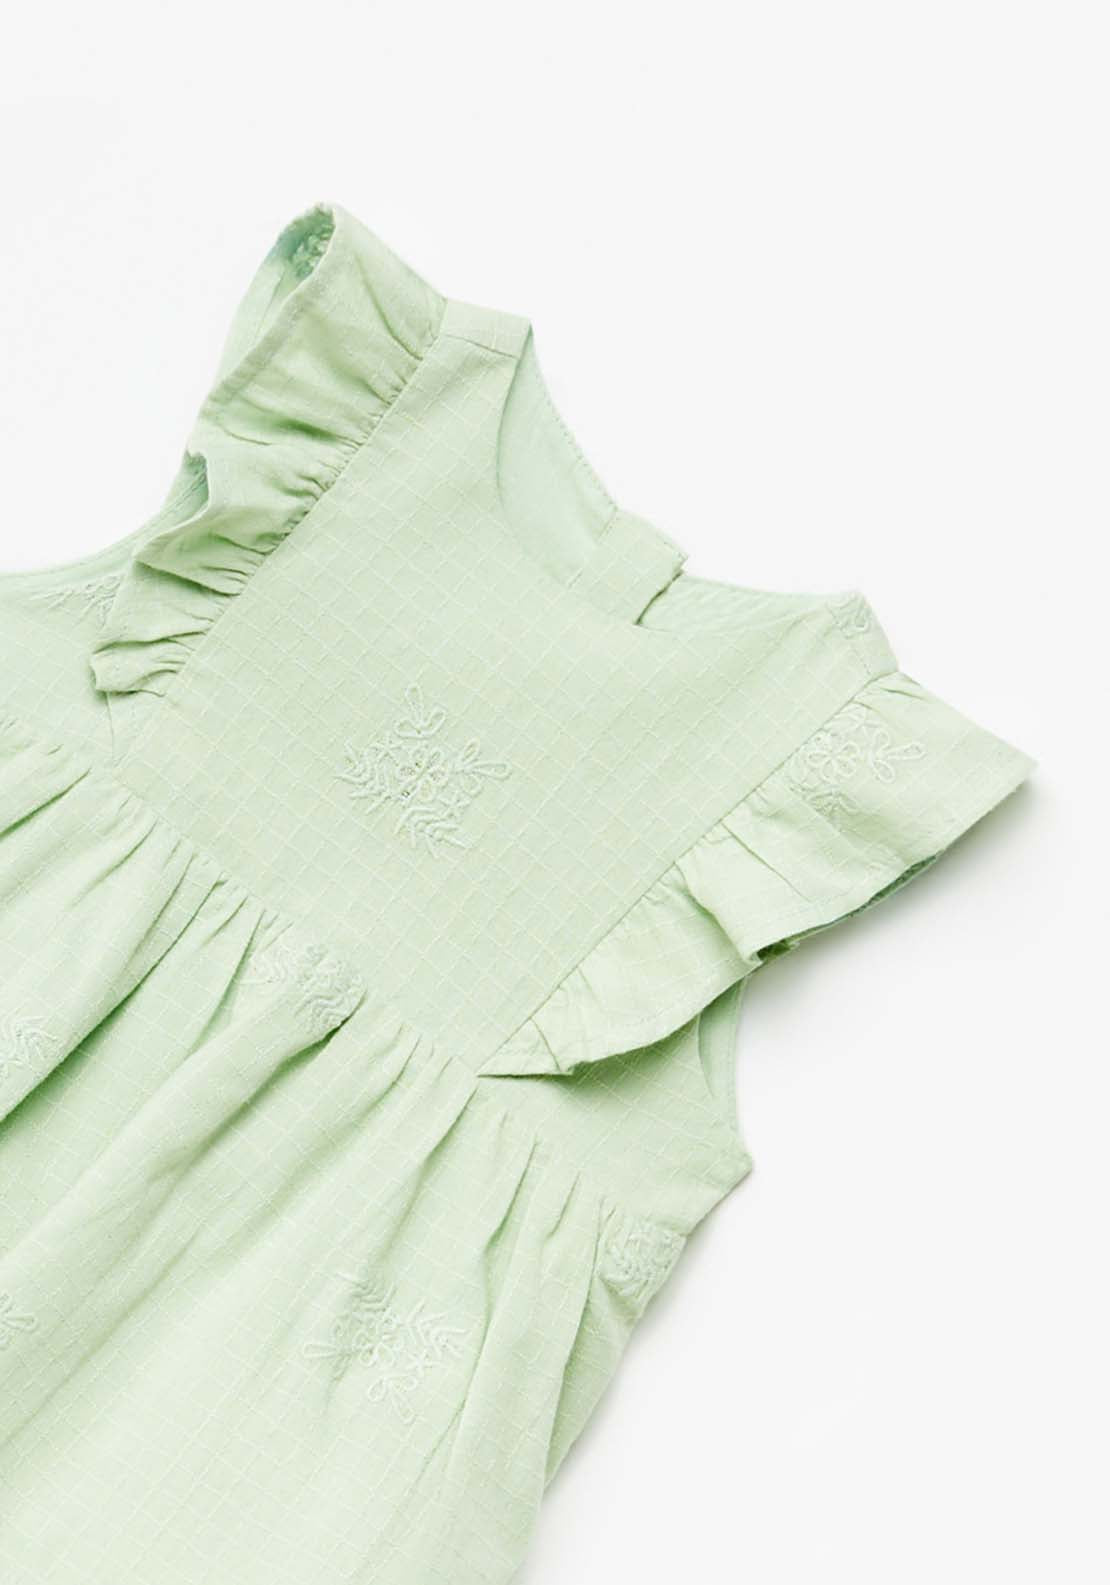 Sfera Blouse Set With Embrodidery - Green 6 Shaws Department Stores